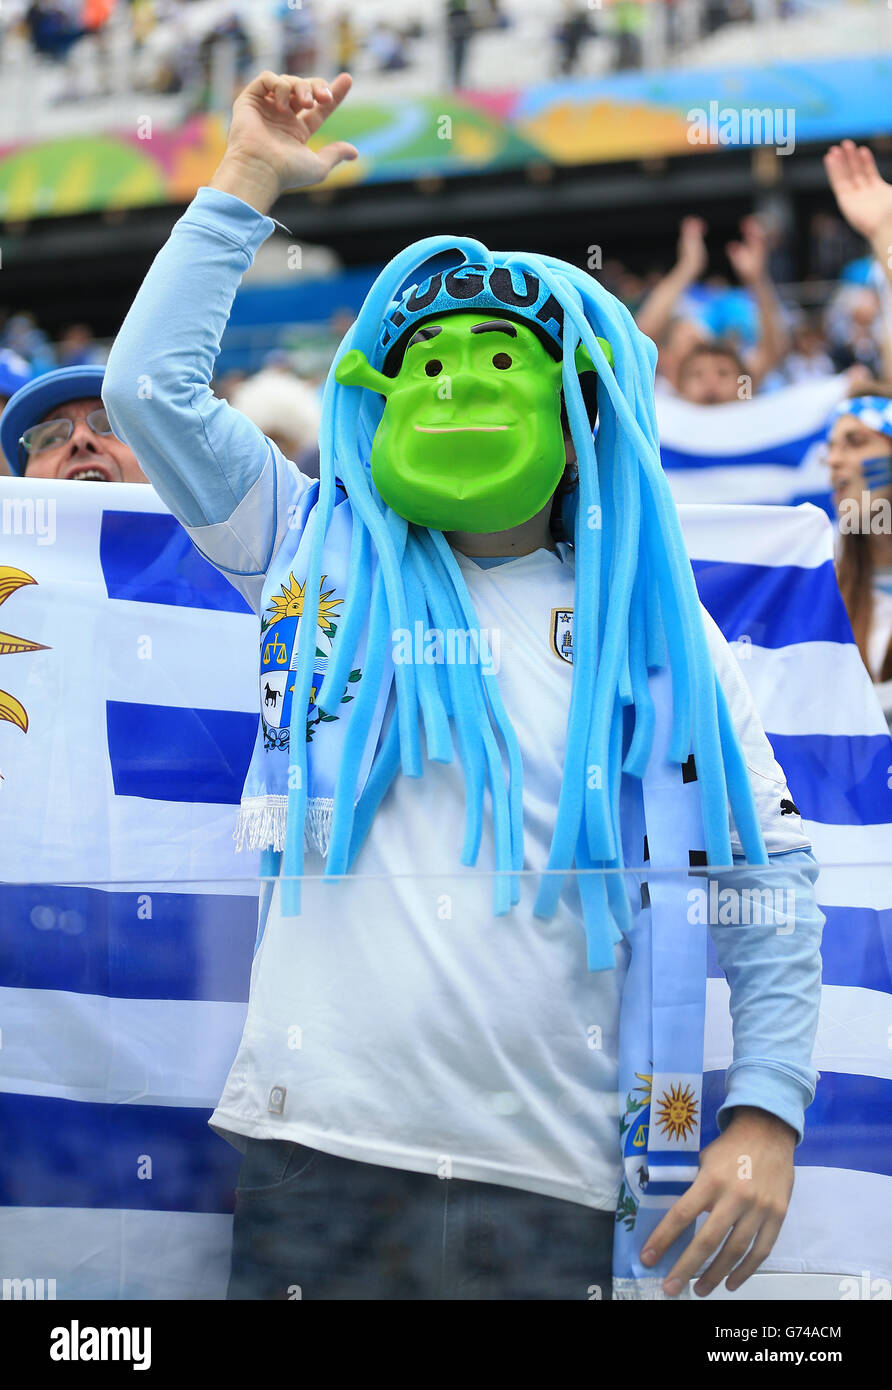 Soccer - FIFA World Cup 2014 - Group D - Uruguay v England - Estadio Do Sao Paulo. A Uruguay fan wearing a mask of Shrek in the stands before the game during the Group D match the Estadio do Sao Paulo, Sao Paulo, Brazil. Stock Photo